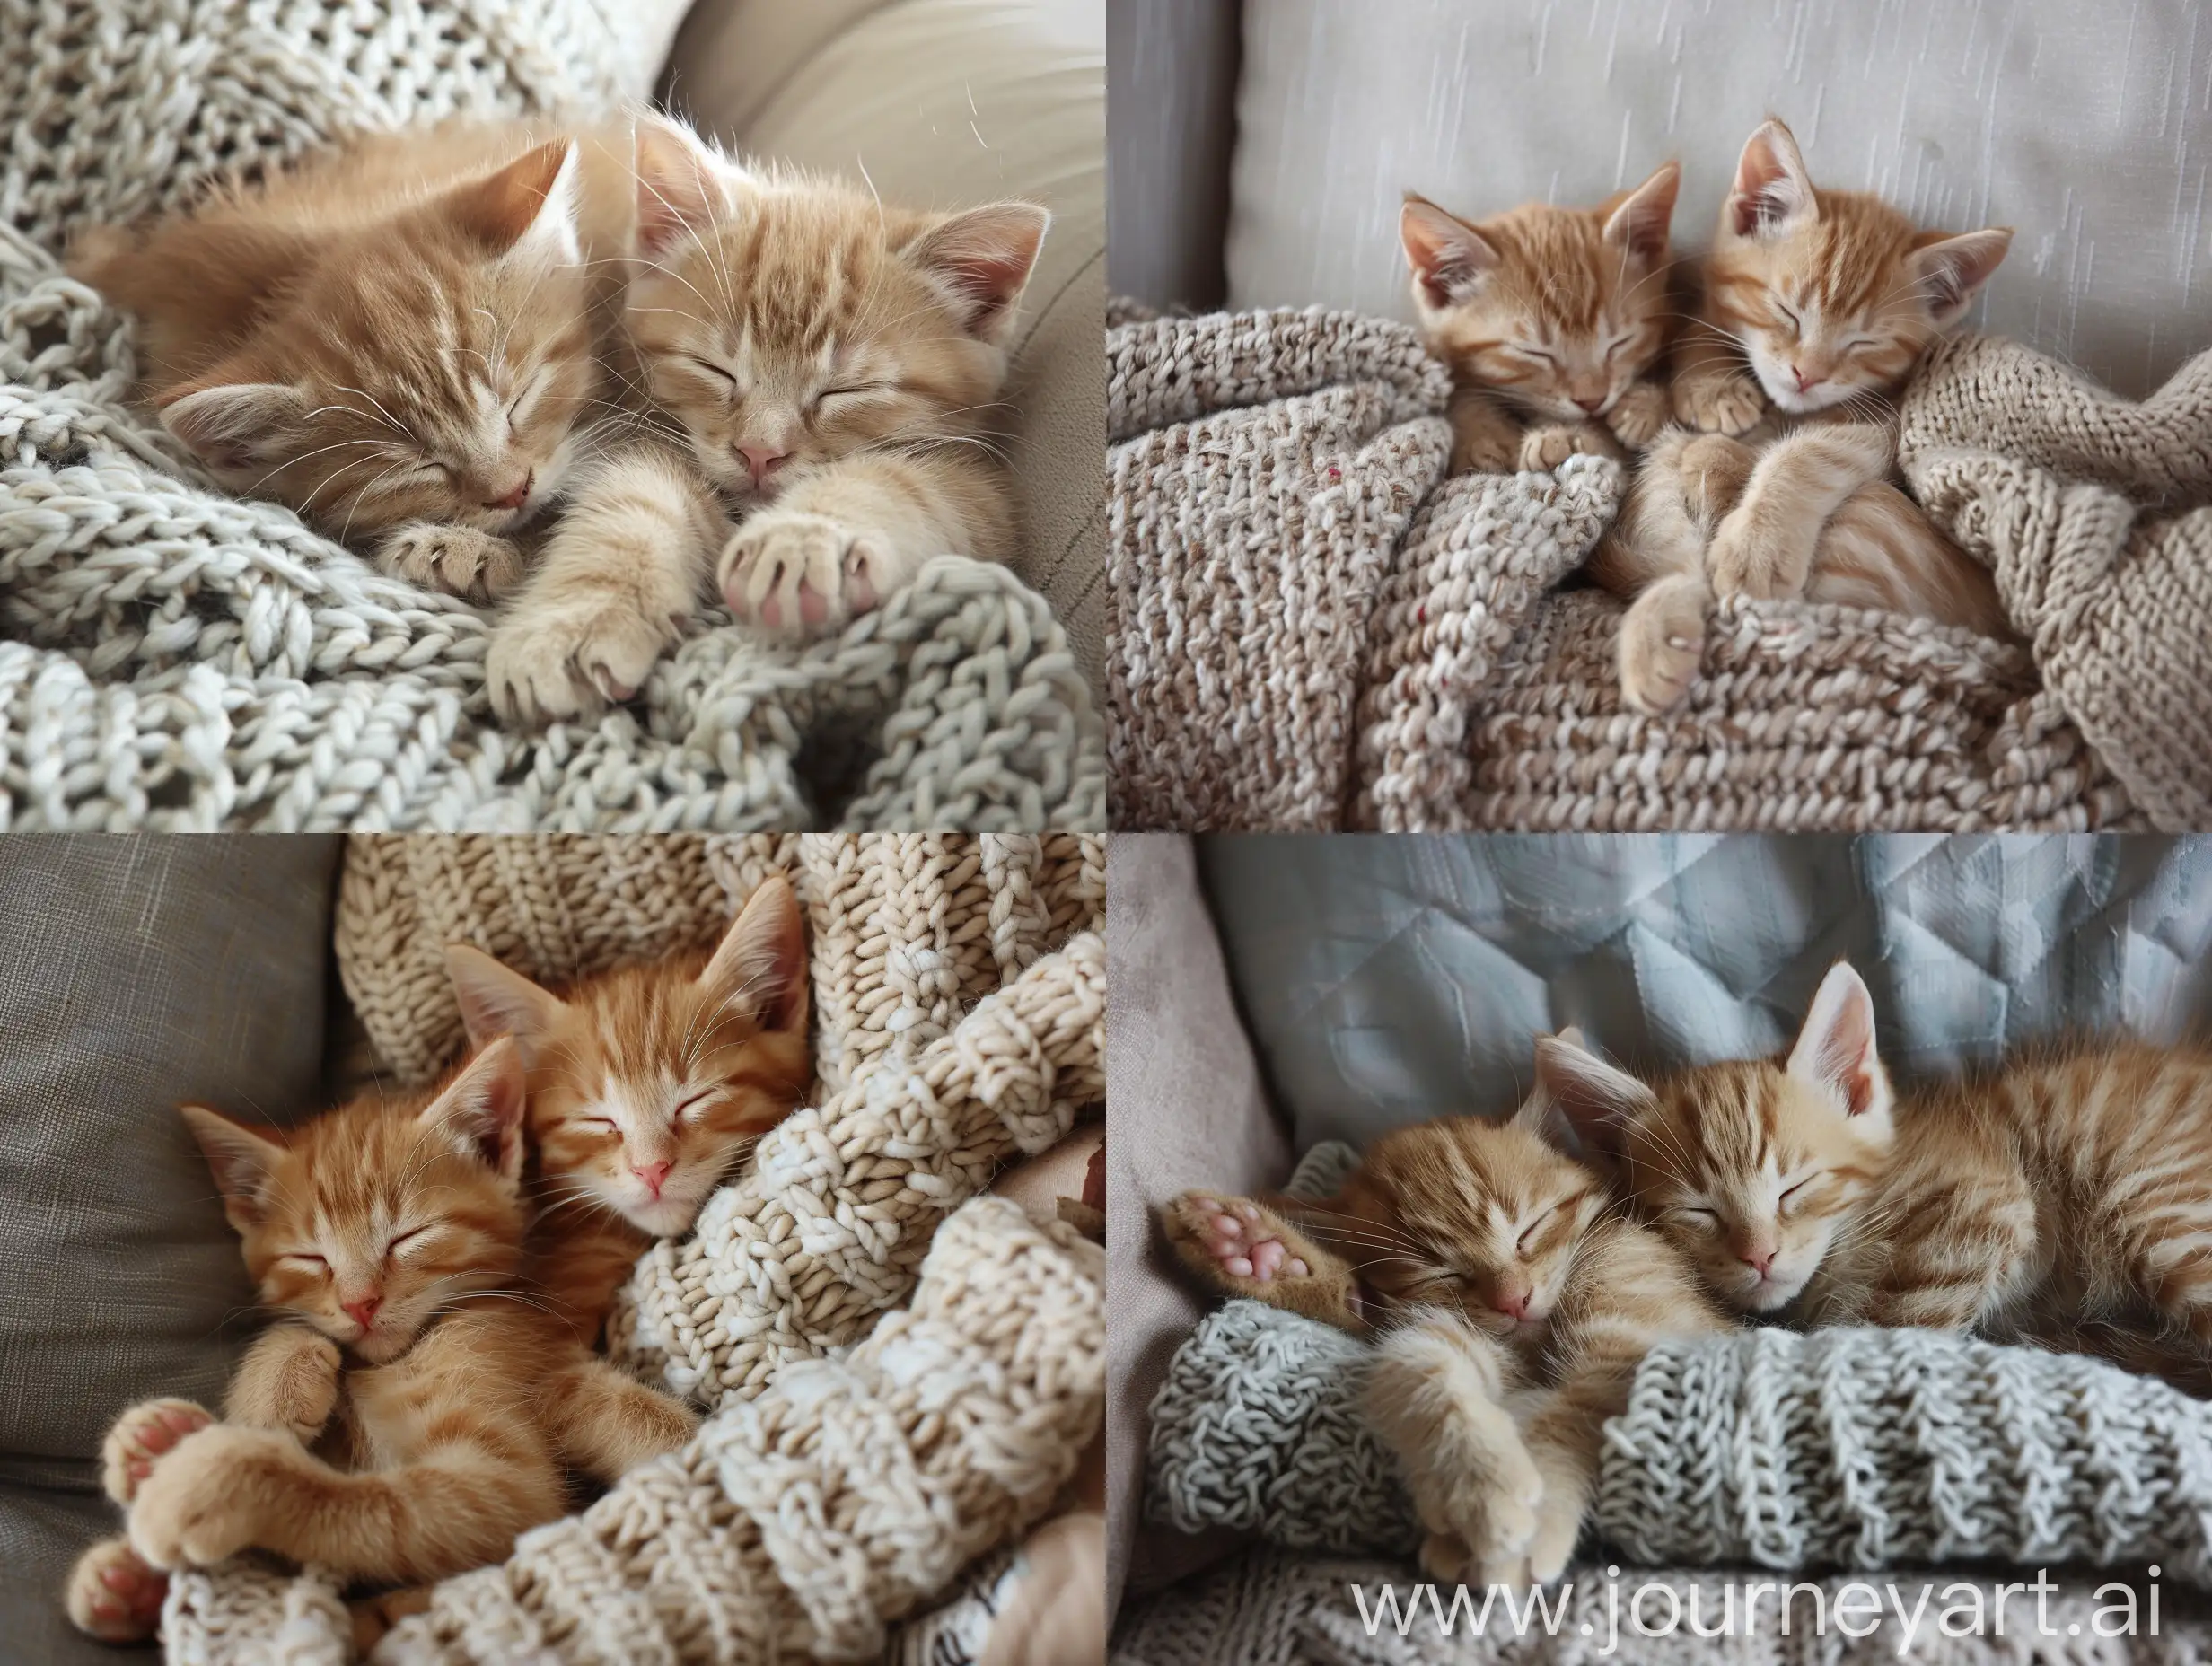 Adorable-Ginger-Kittens-Cuddling-on-Couch-Under-Knitted-Blanket